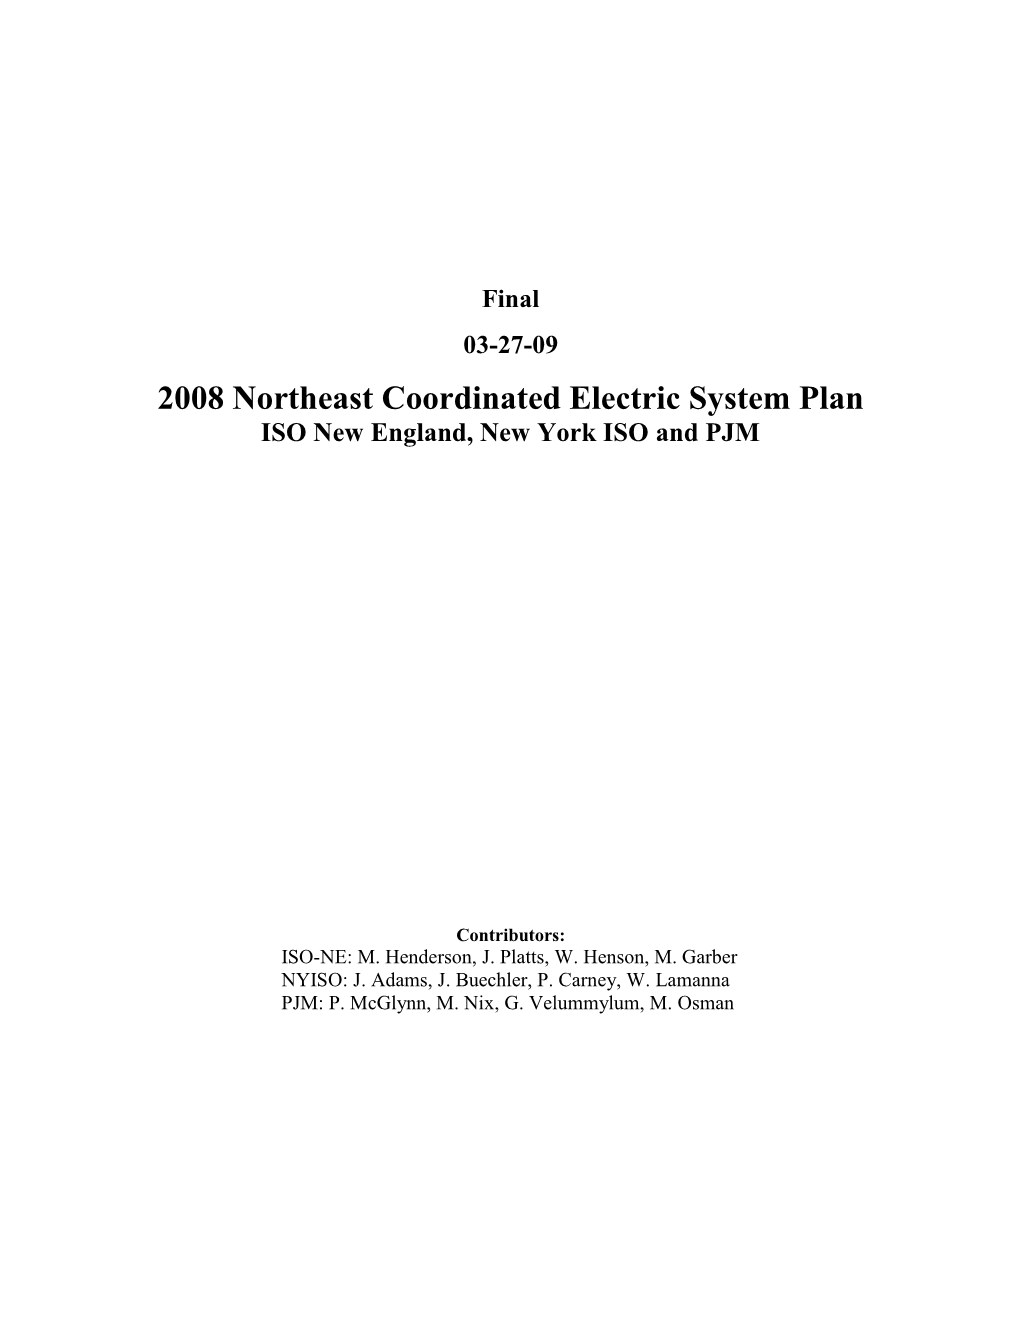 2008 Northeast Coordinated Electric System Plan ISO New England, New York ISO and PJM